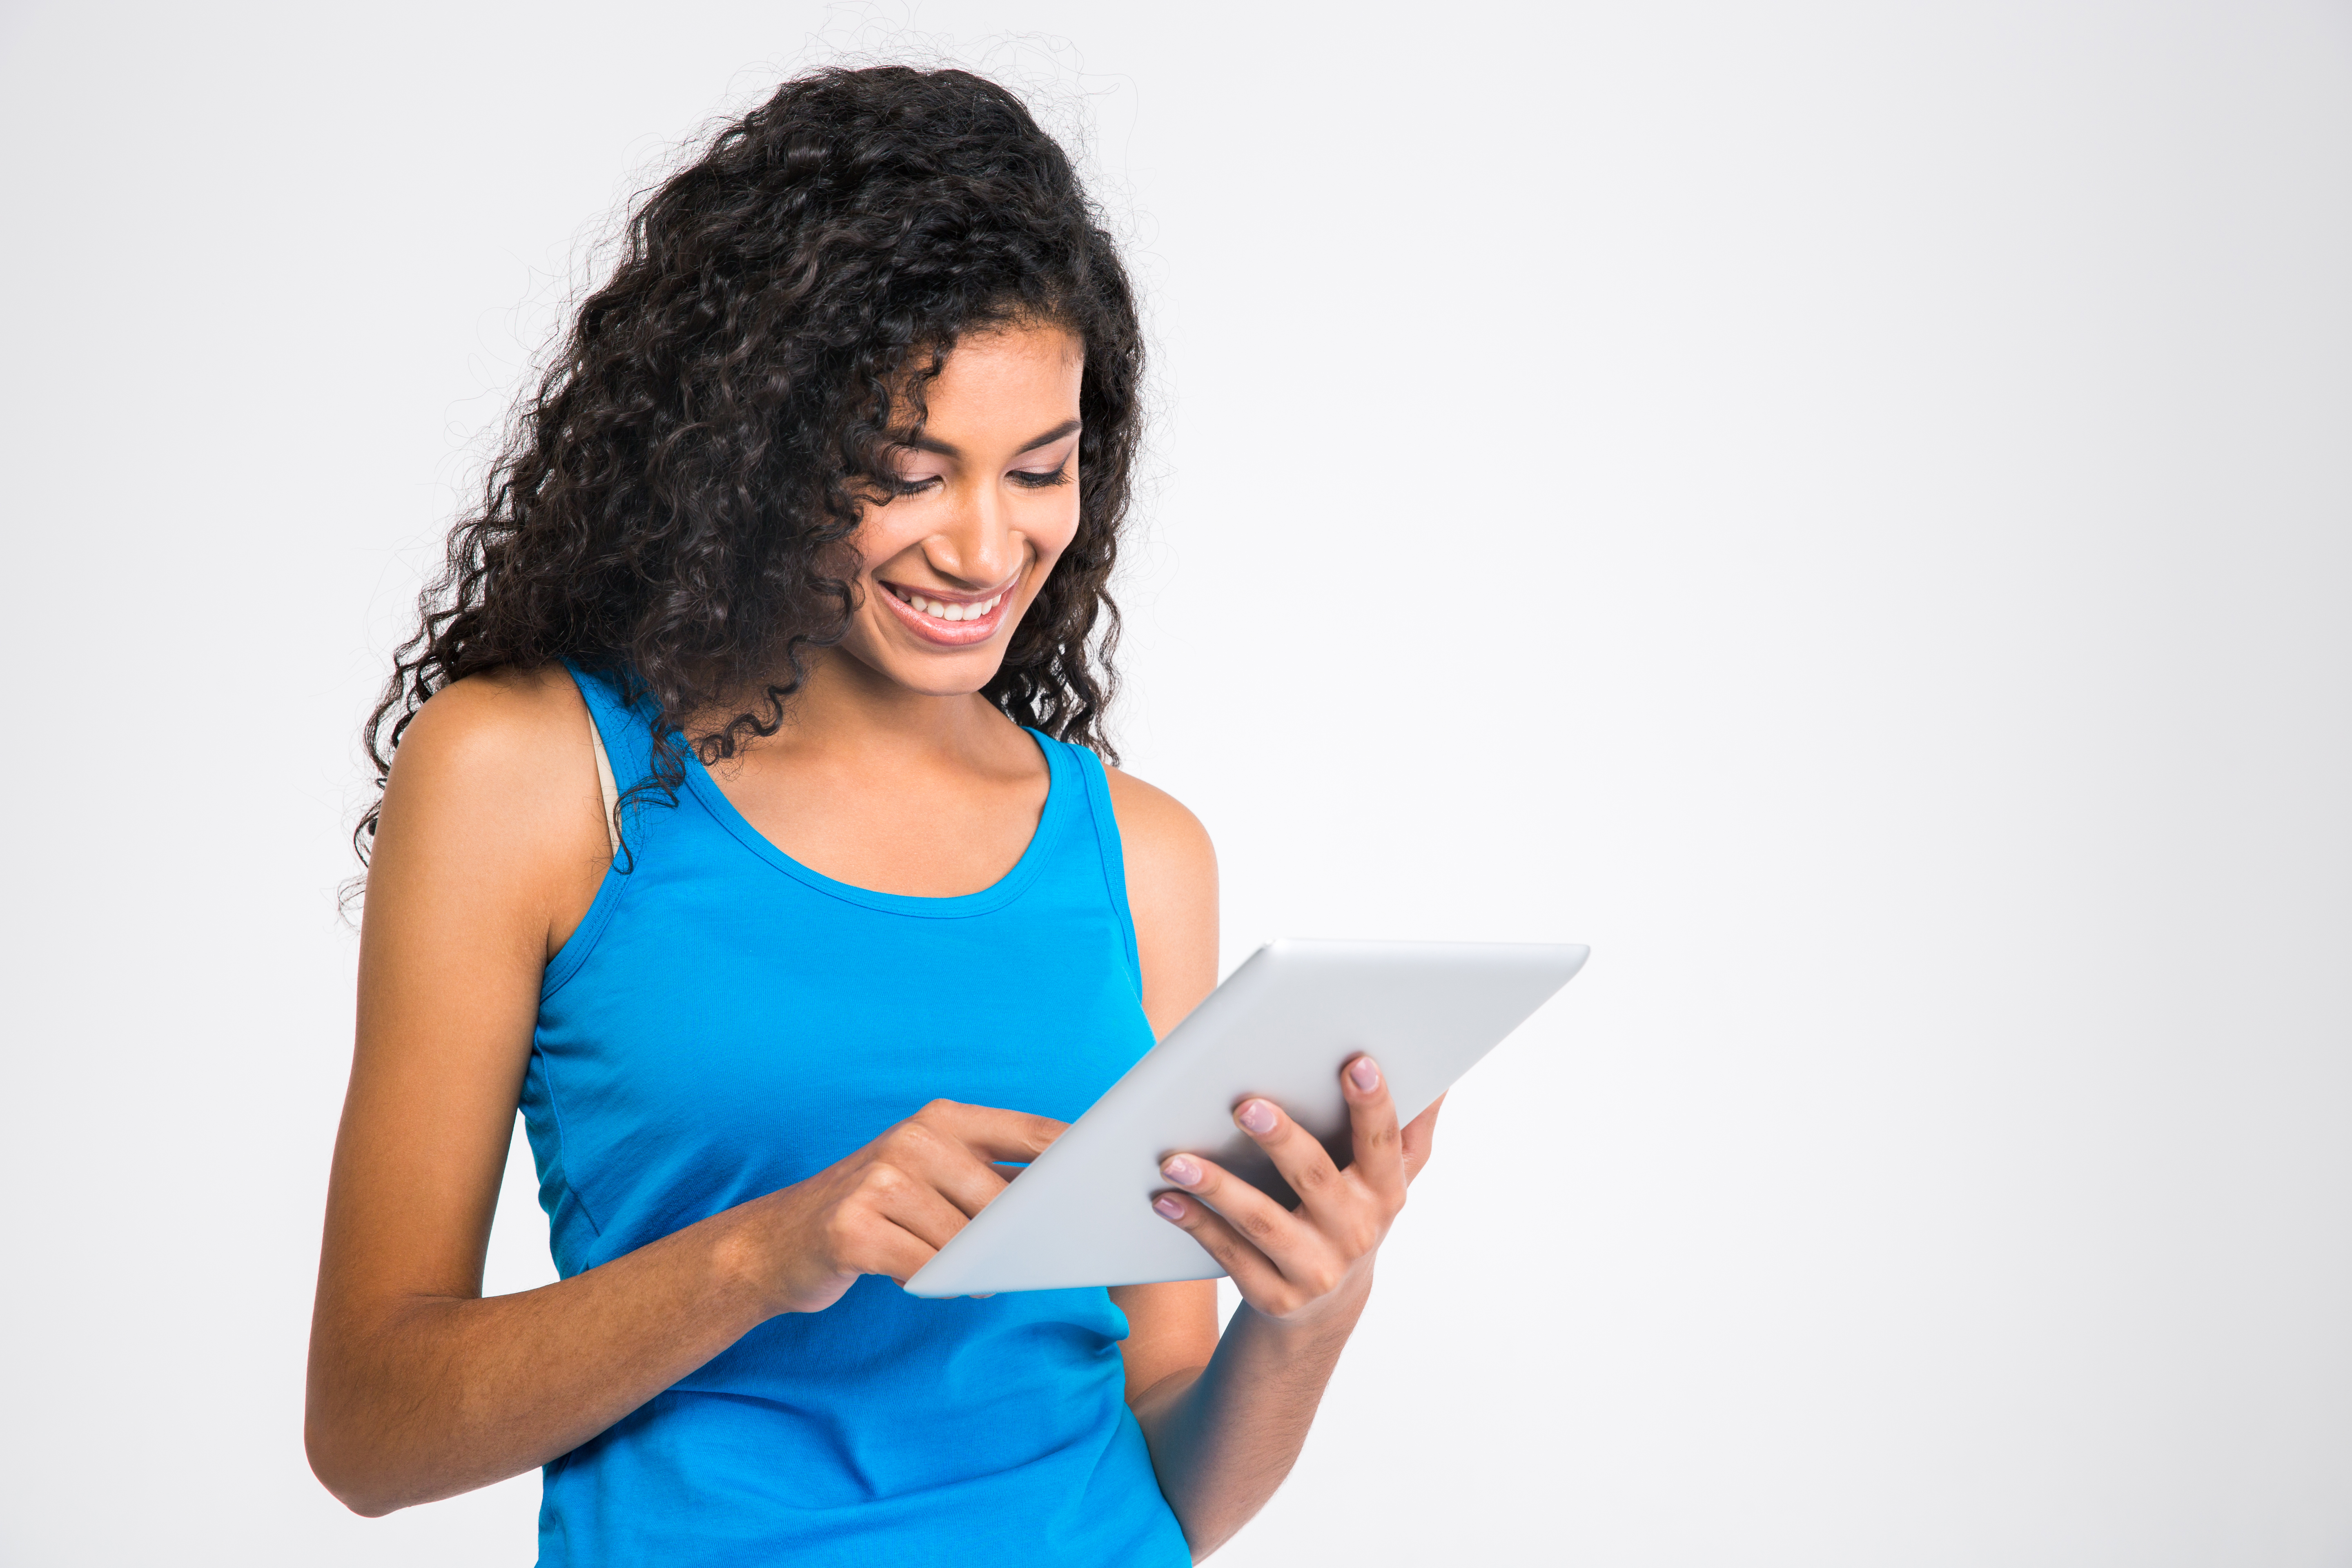 Portrait of a smiling woman using tablet computer